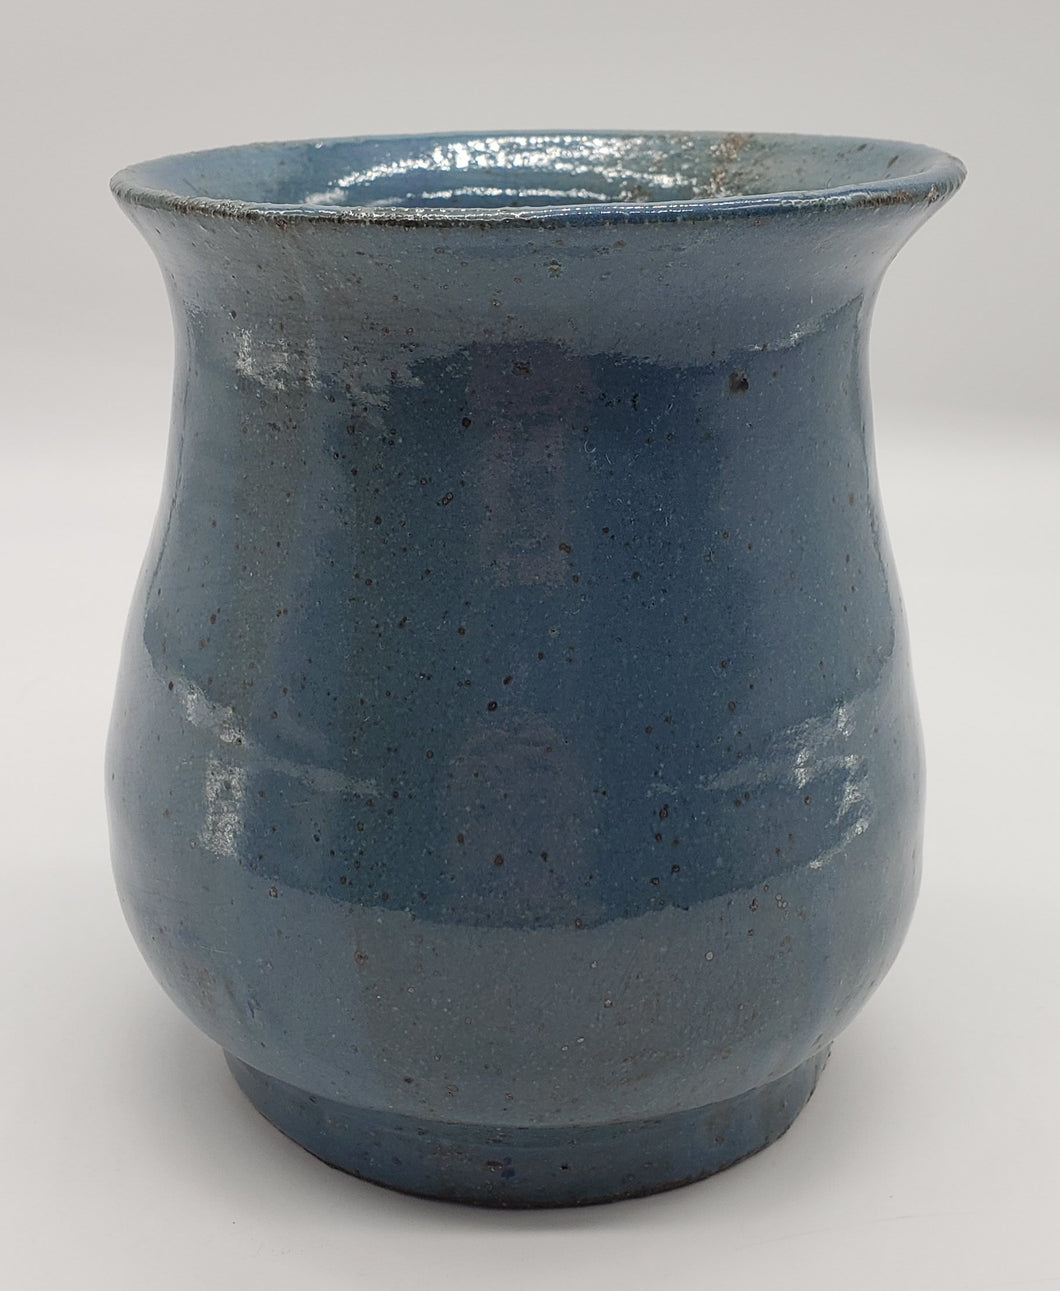 Simple Speckled and Shaded Blue Stoneware Vase